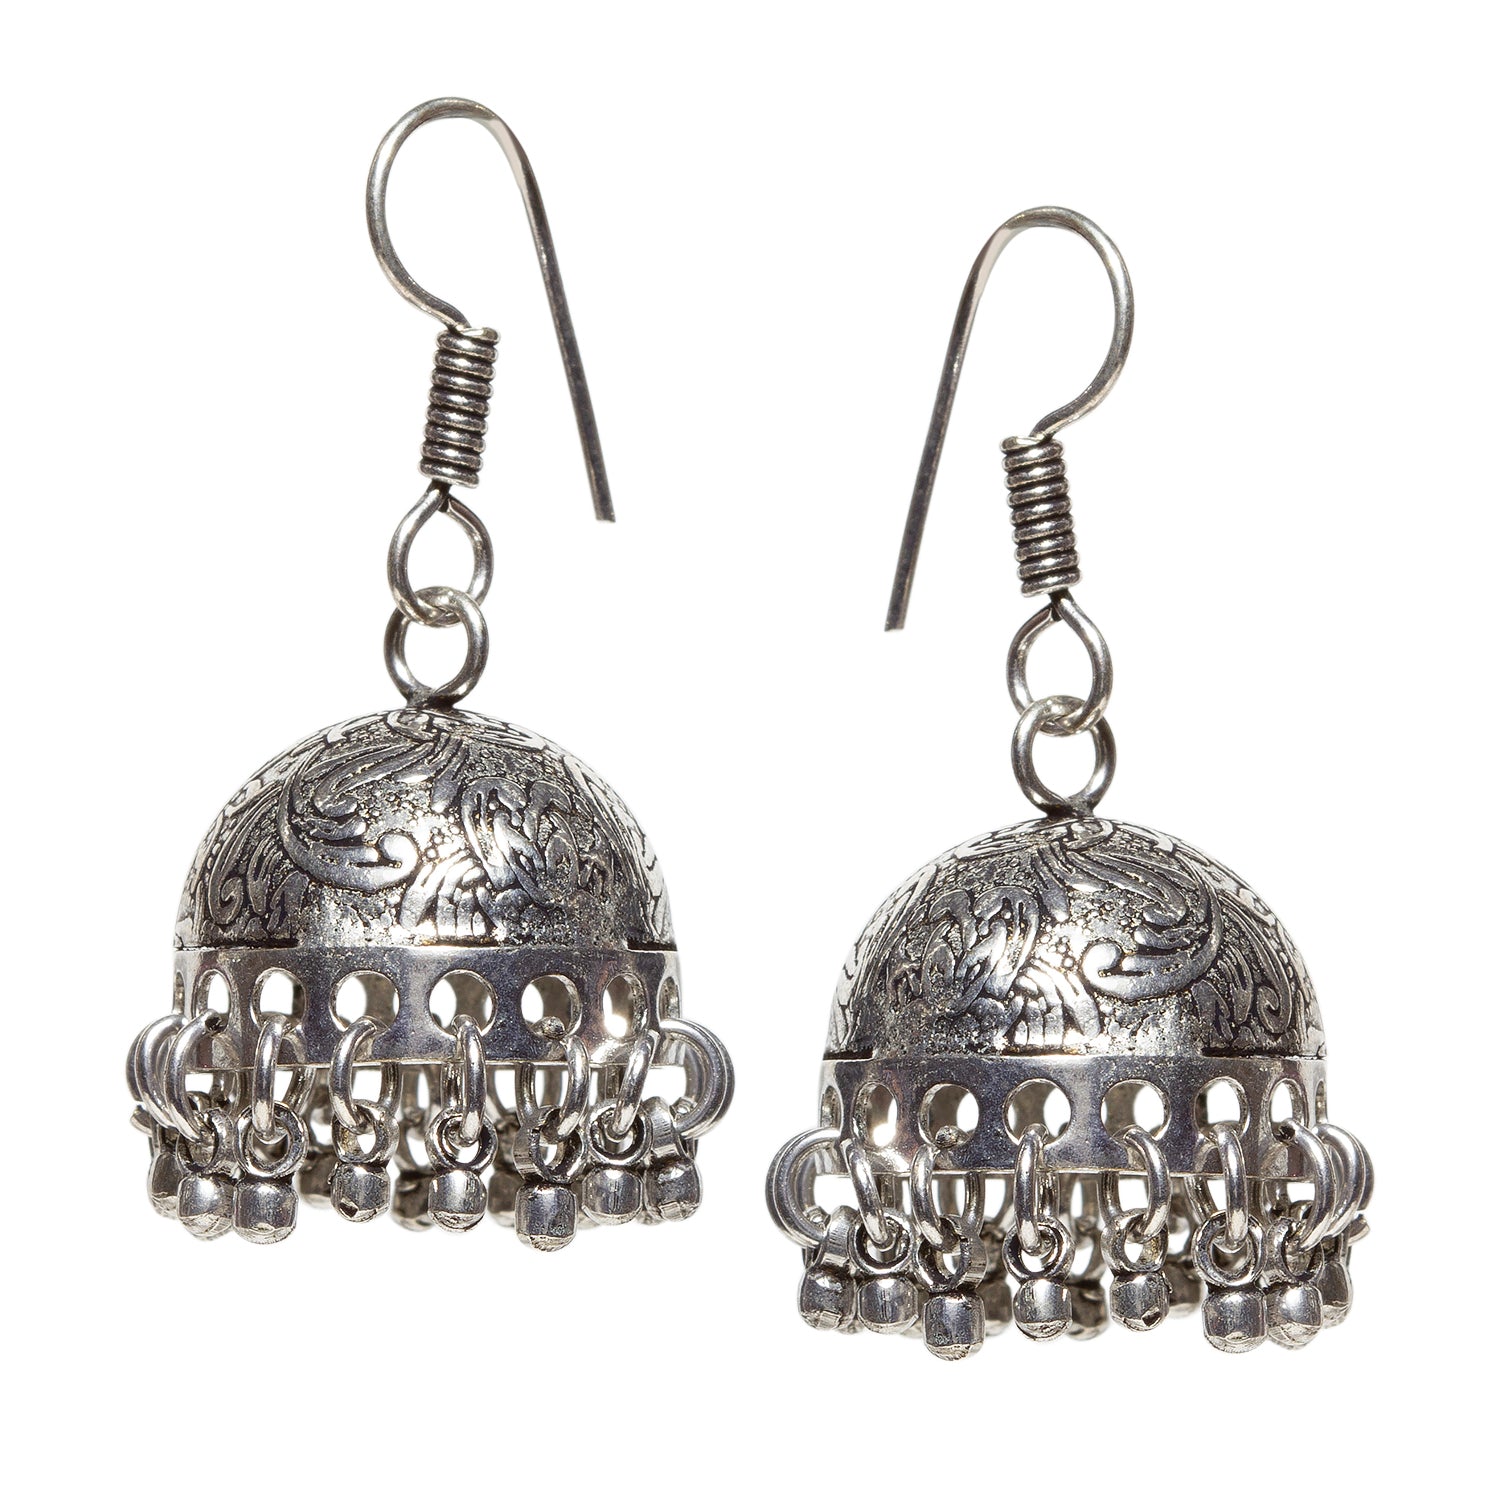 Indian Traditional Silver Plated Bollywood Oxidized Jhumka Earrings Jhumki  Drop | eBay